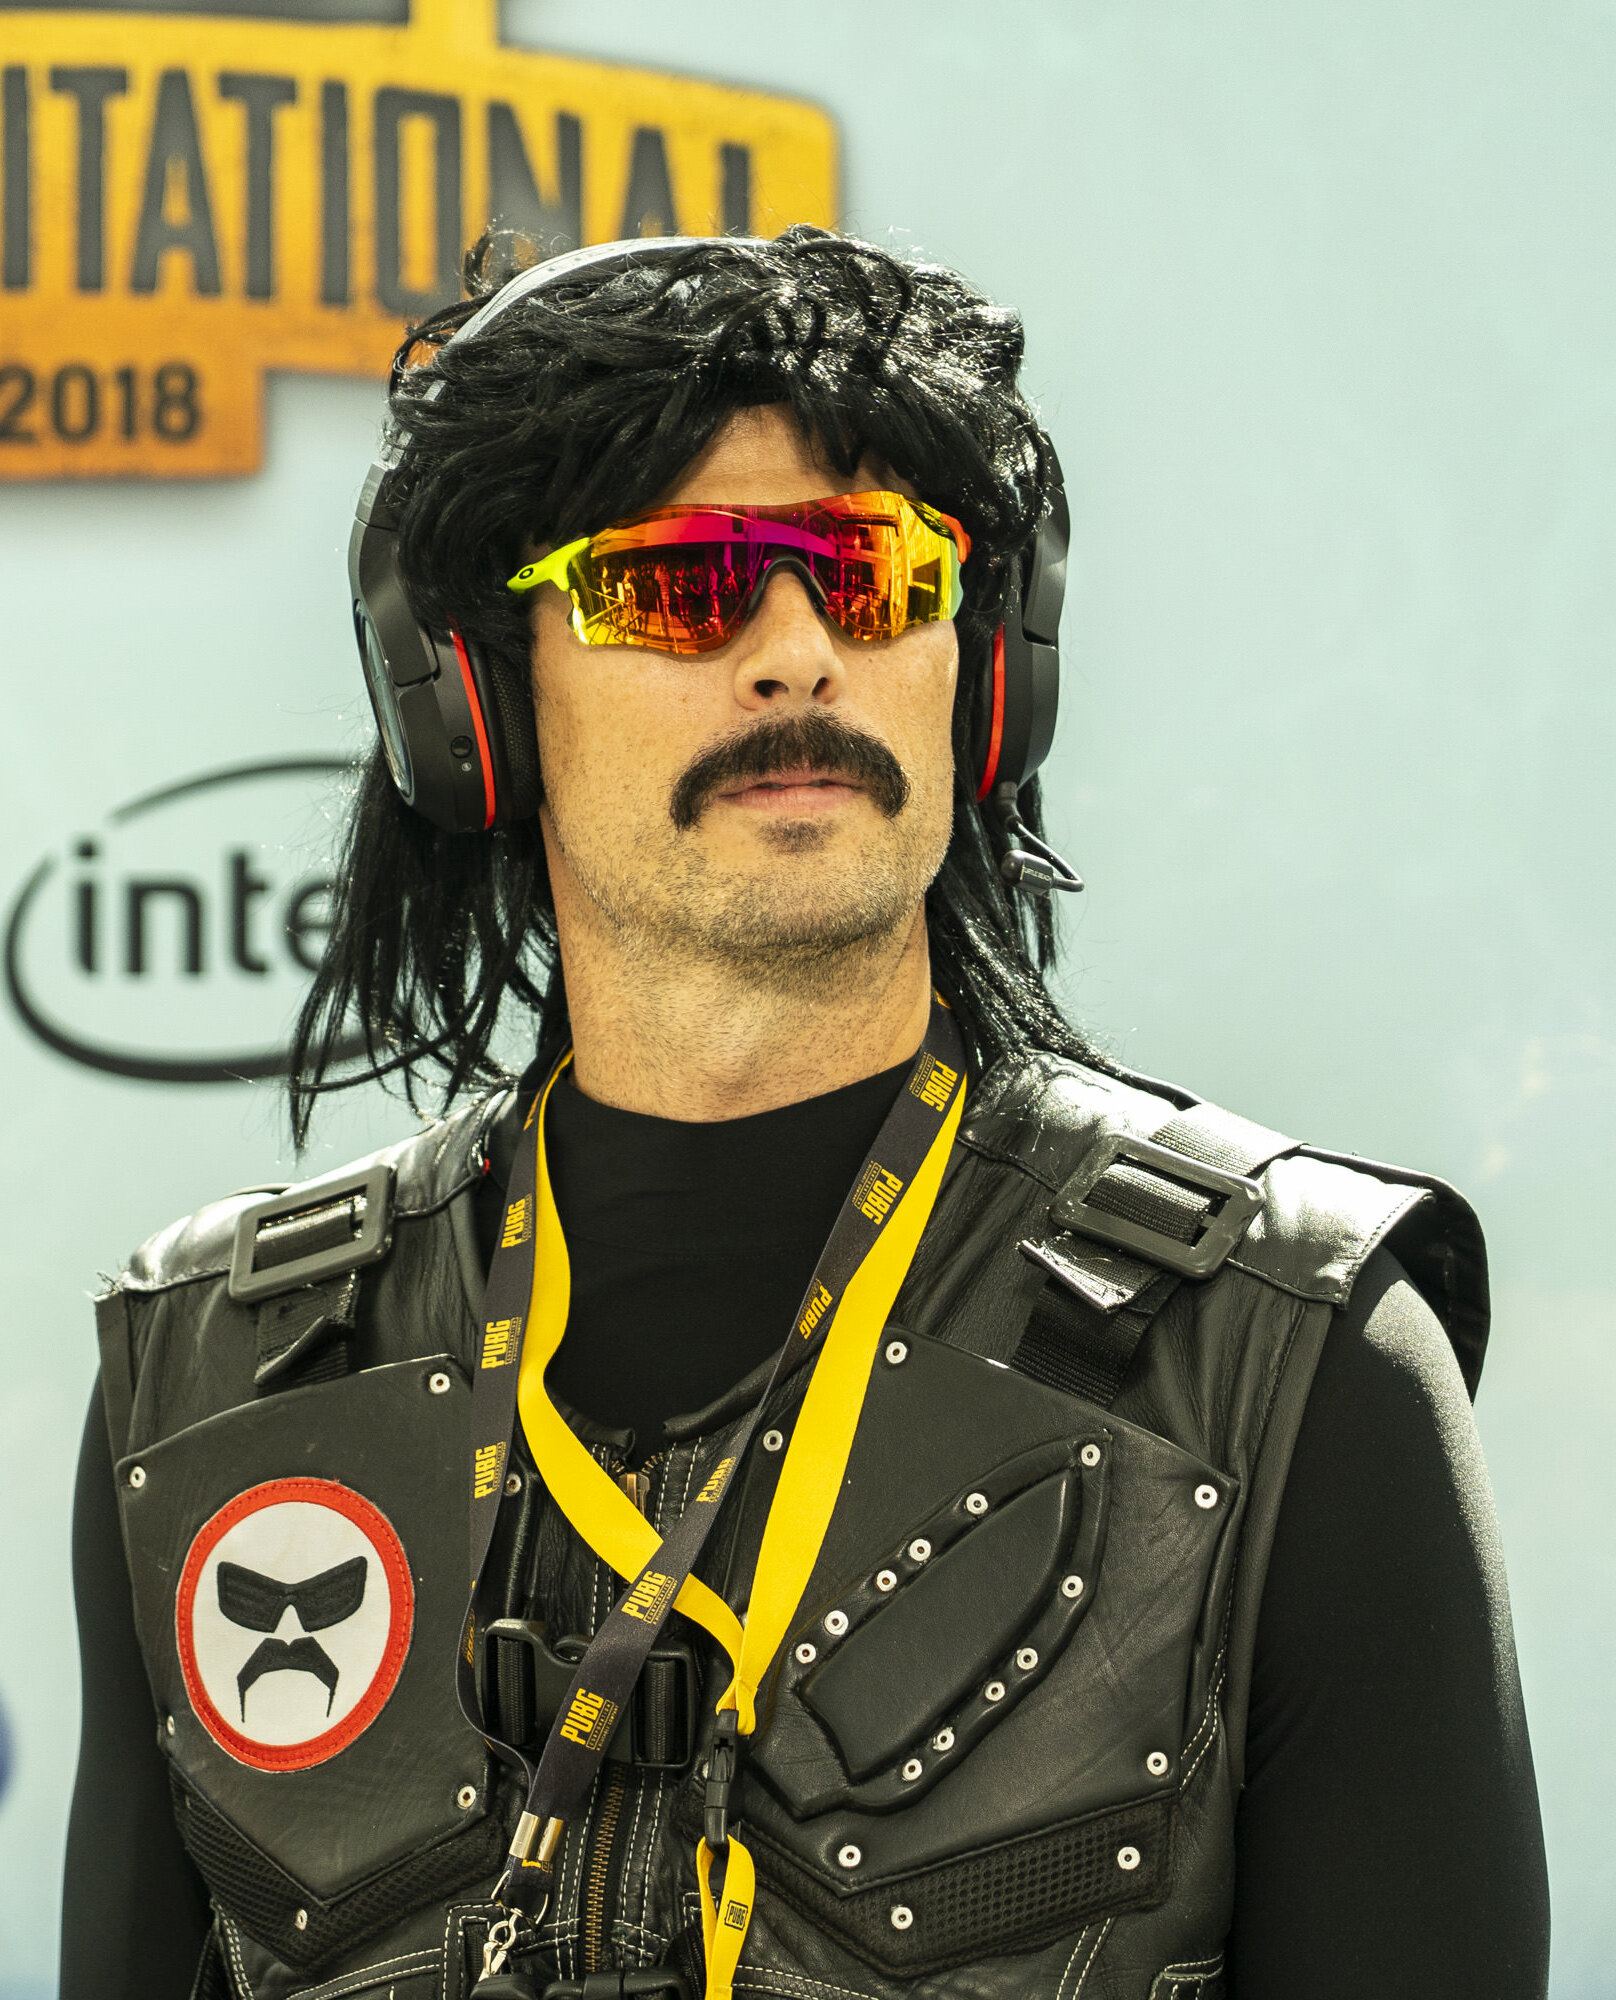 david l allen recommends who did drdisrespect cheat with pic